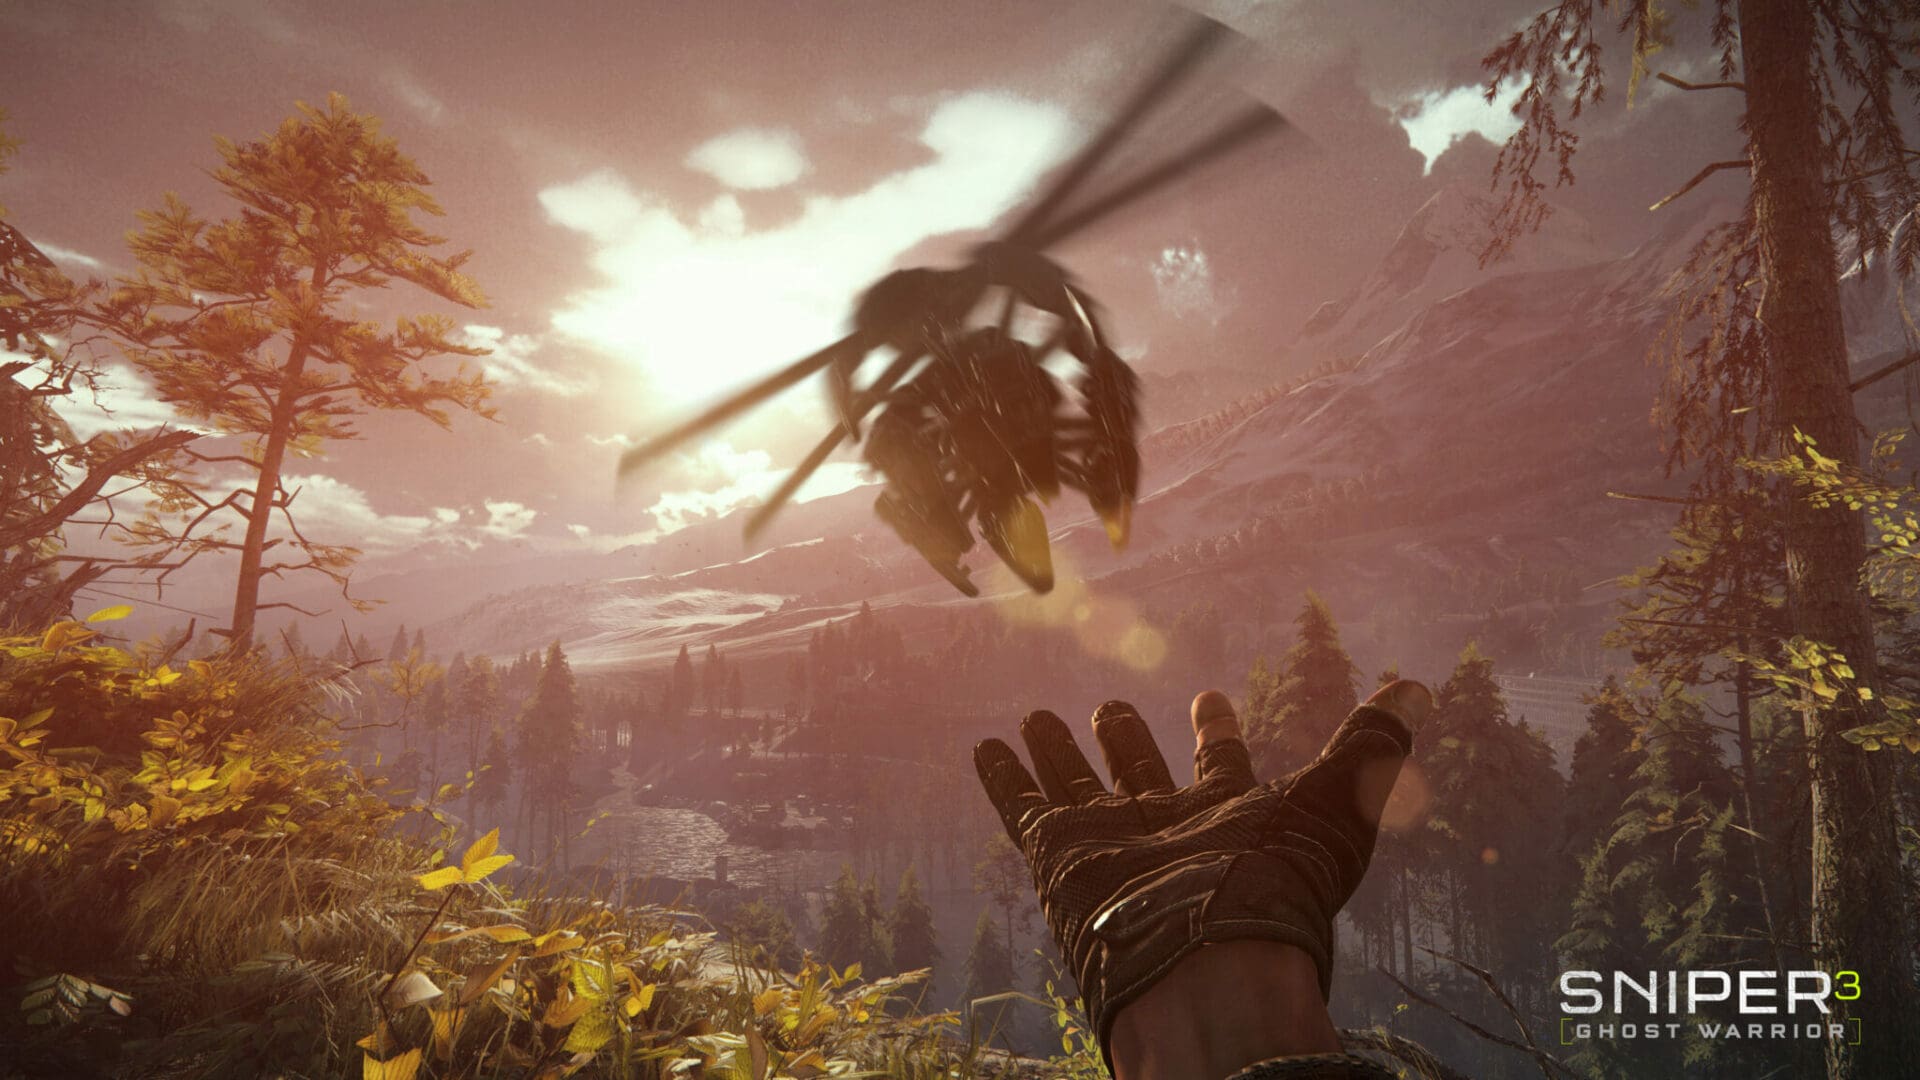 Crytek Unveils New Engine, And It’s Free (If You Want)!